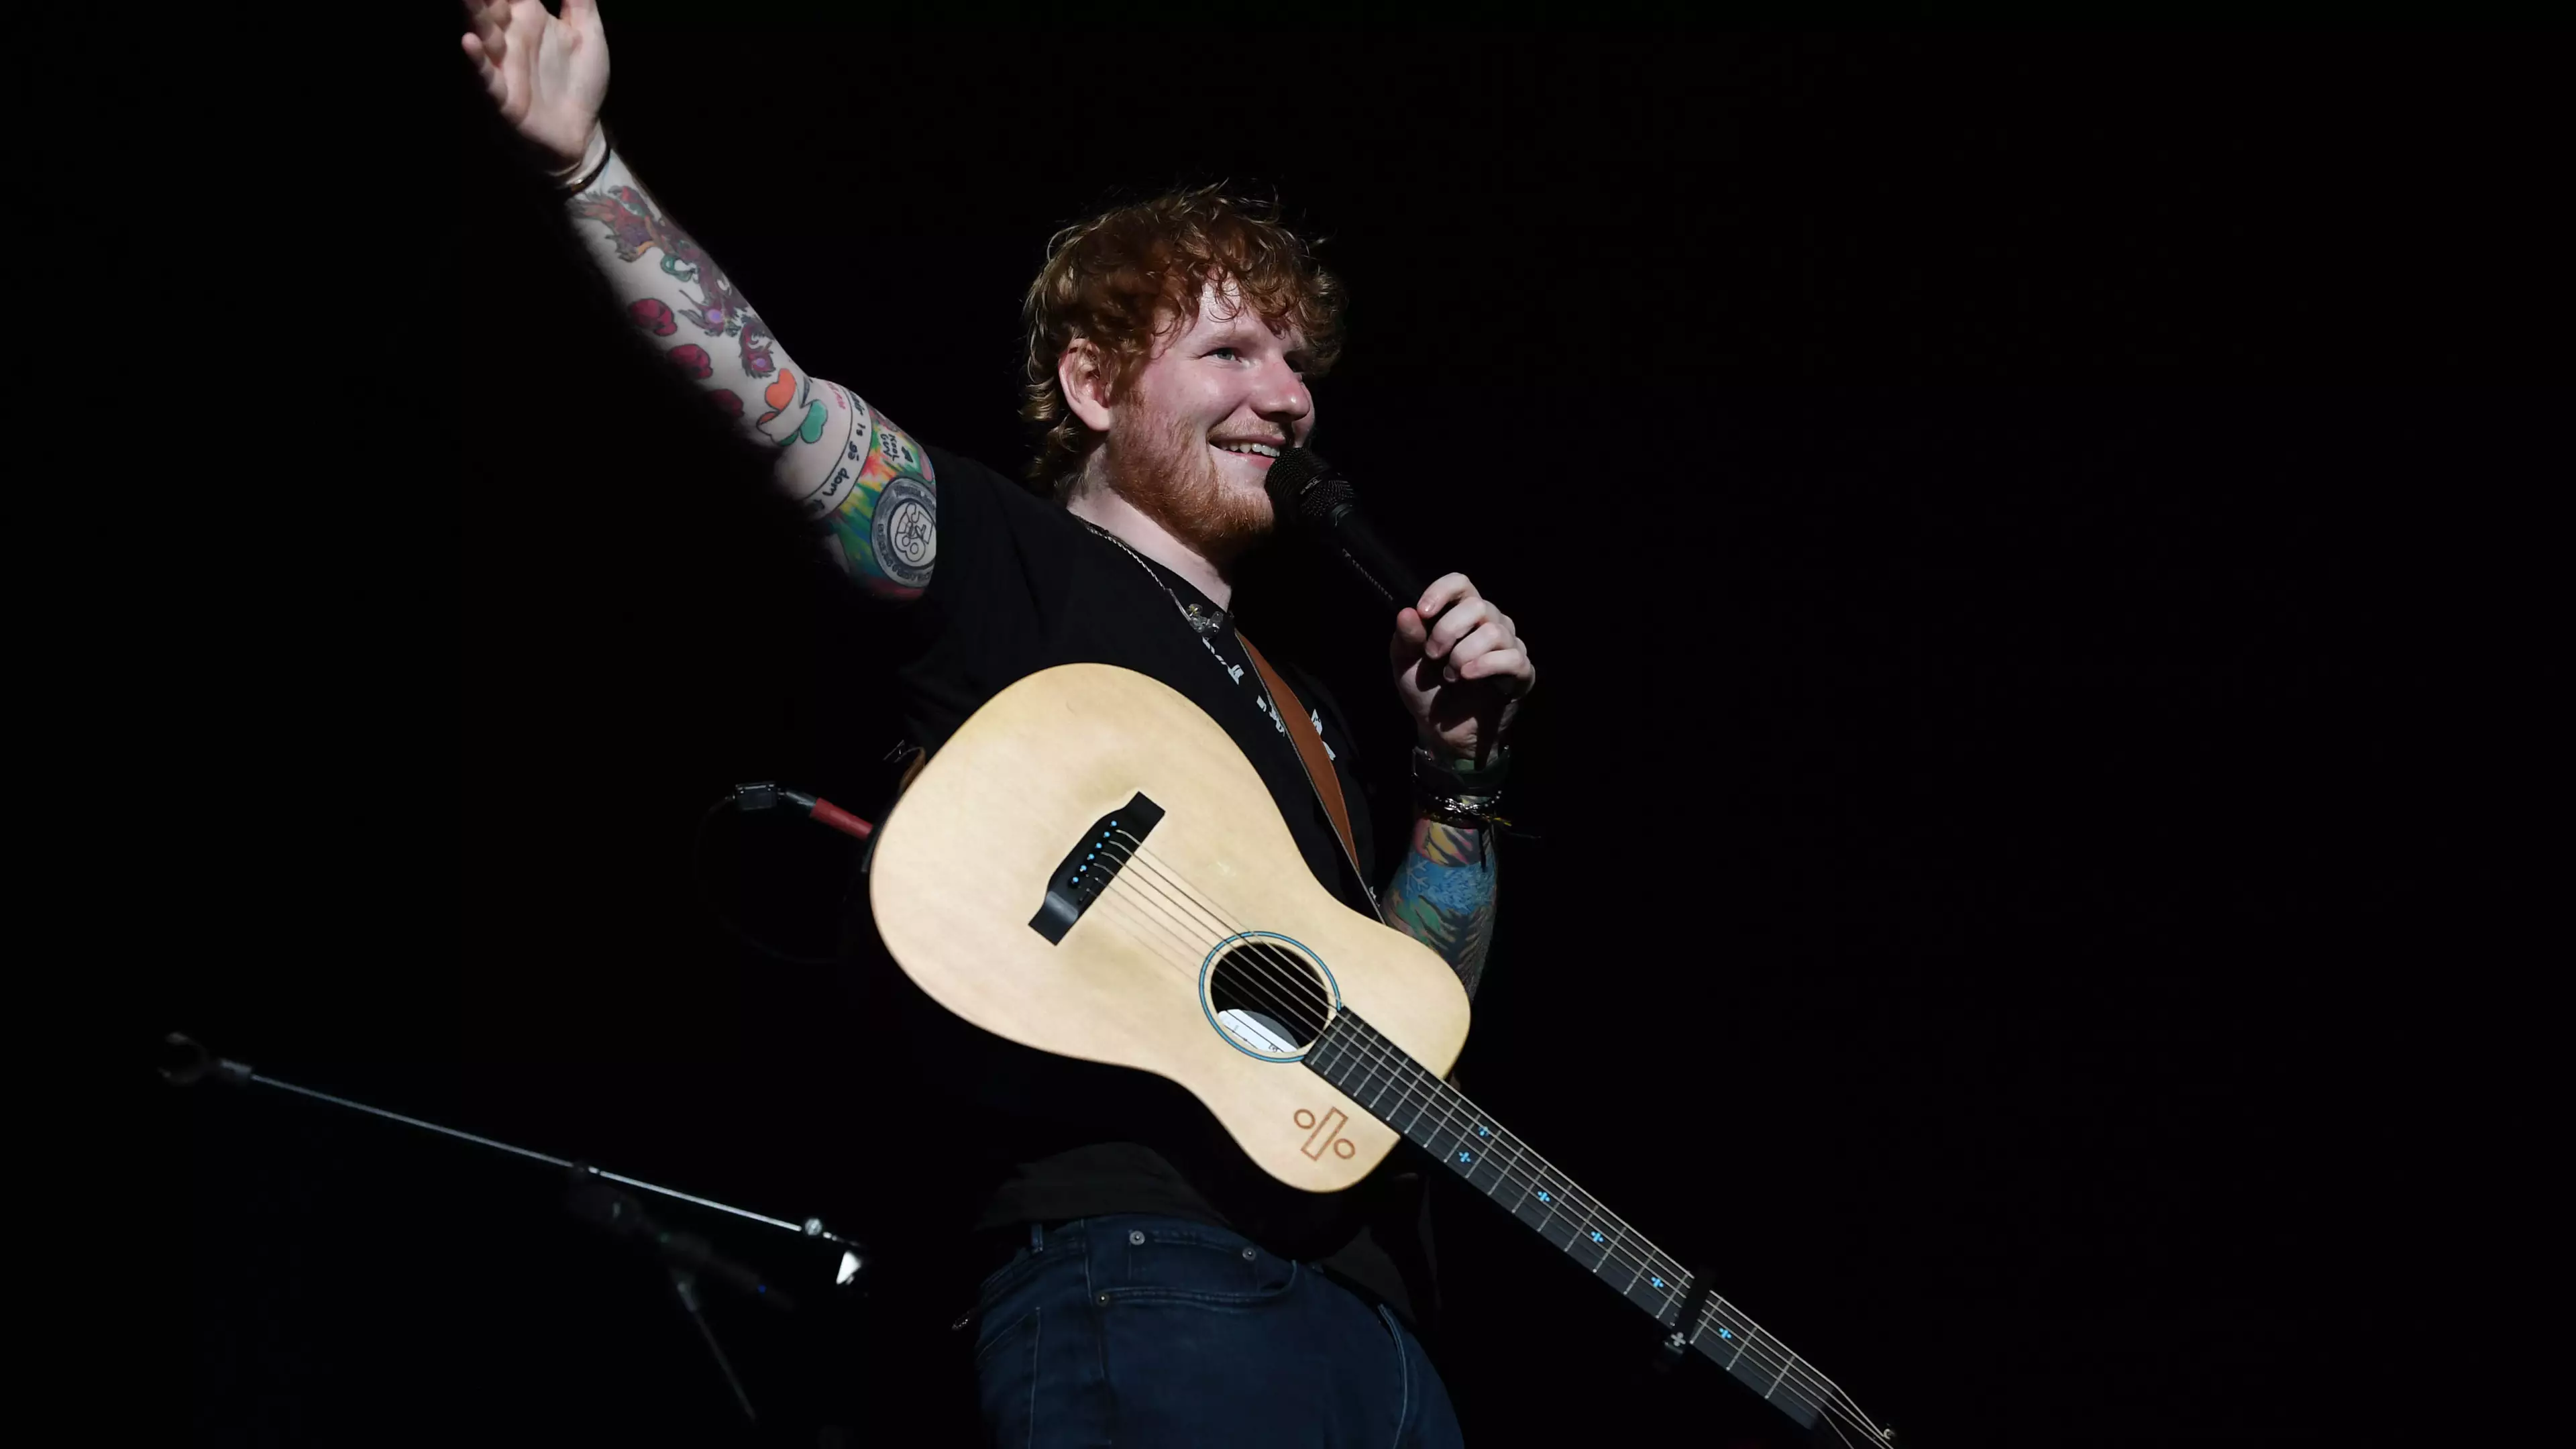 Ed Sheeran Roundhay Park, Leeds: Tickets, Latest Weather Predictions And Potential Songs